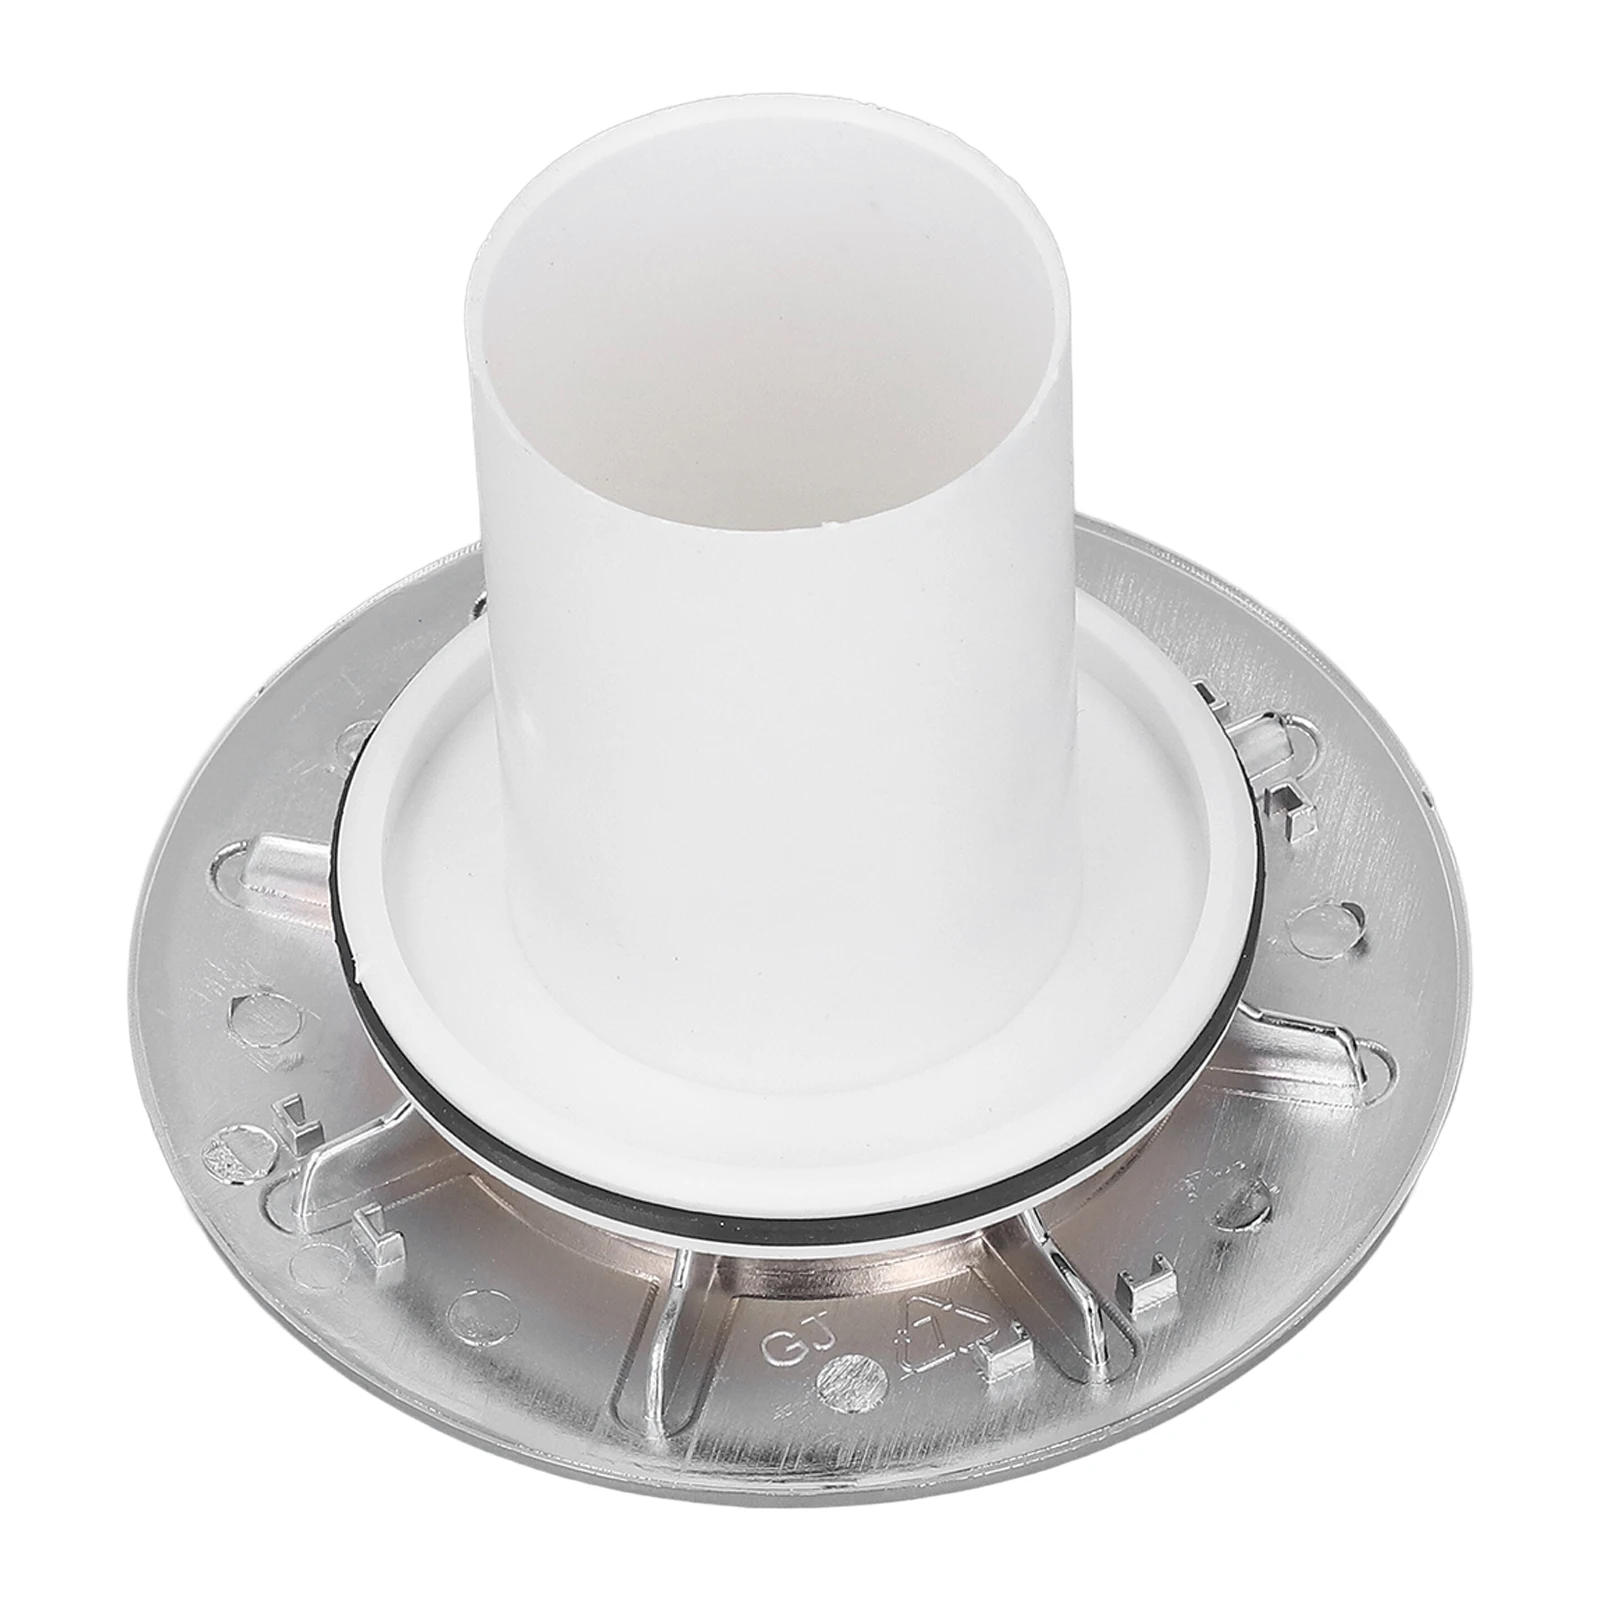 Shower Drain Cover Shower Trap Cover Replacement Shower Plughole Cover  Shower Waste Trap Cover Shower Tray